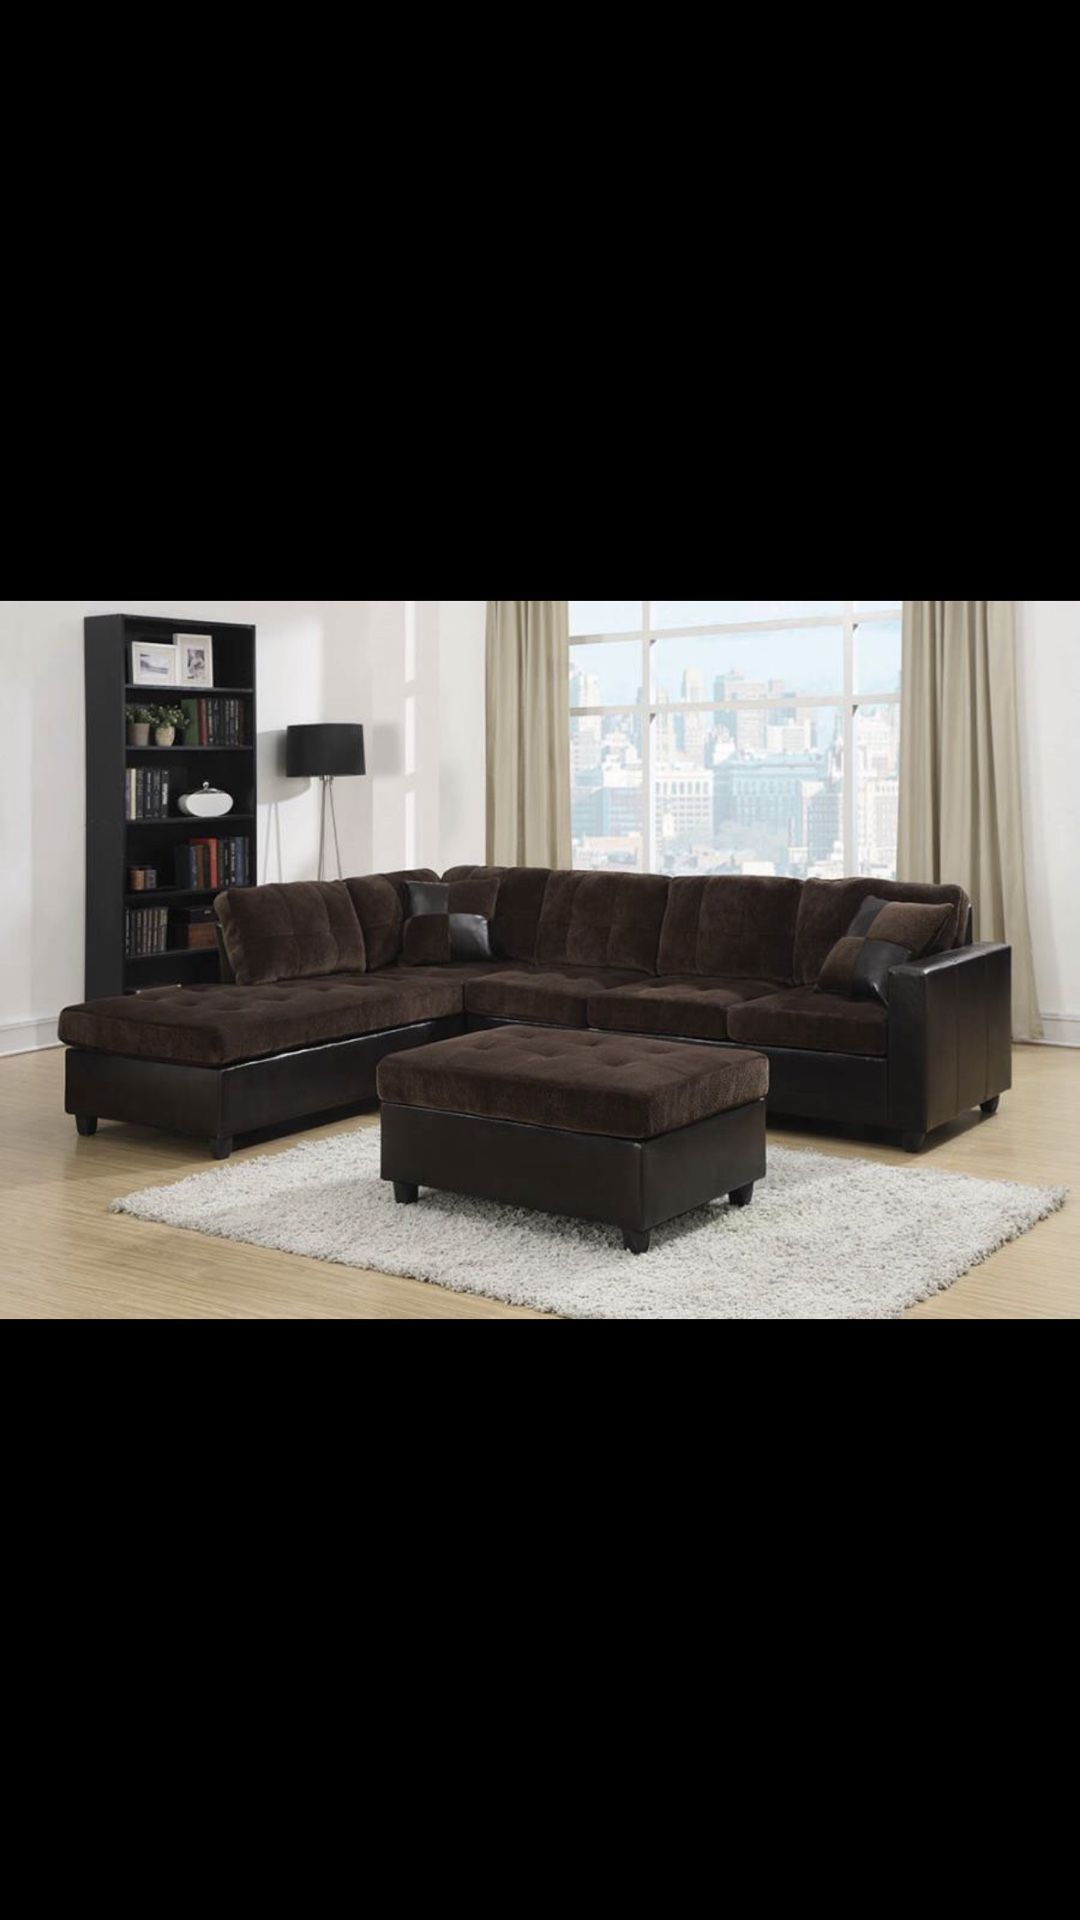 Beautiful new sectional sofa & ottoman only 799$!!!